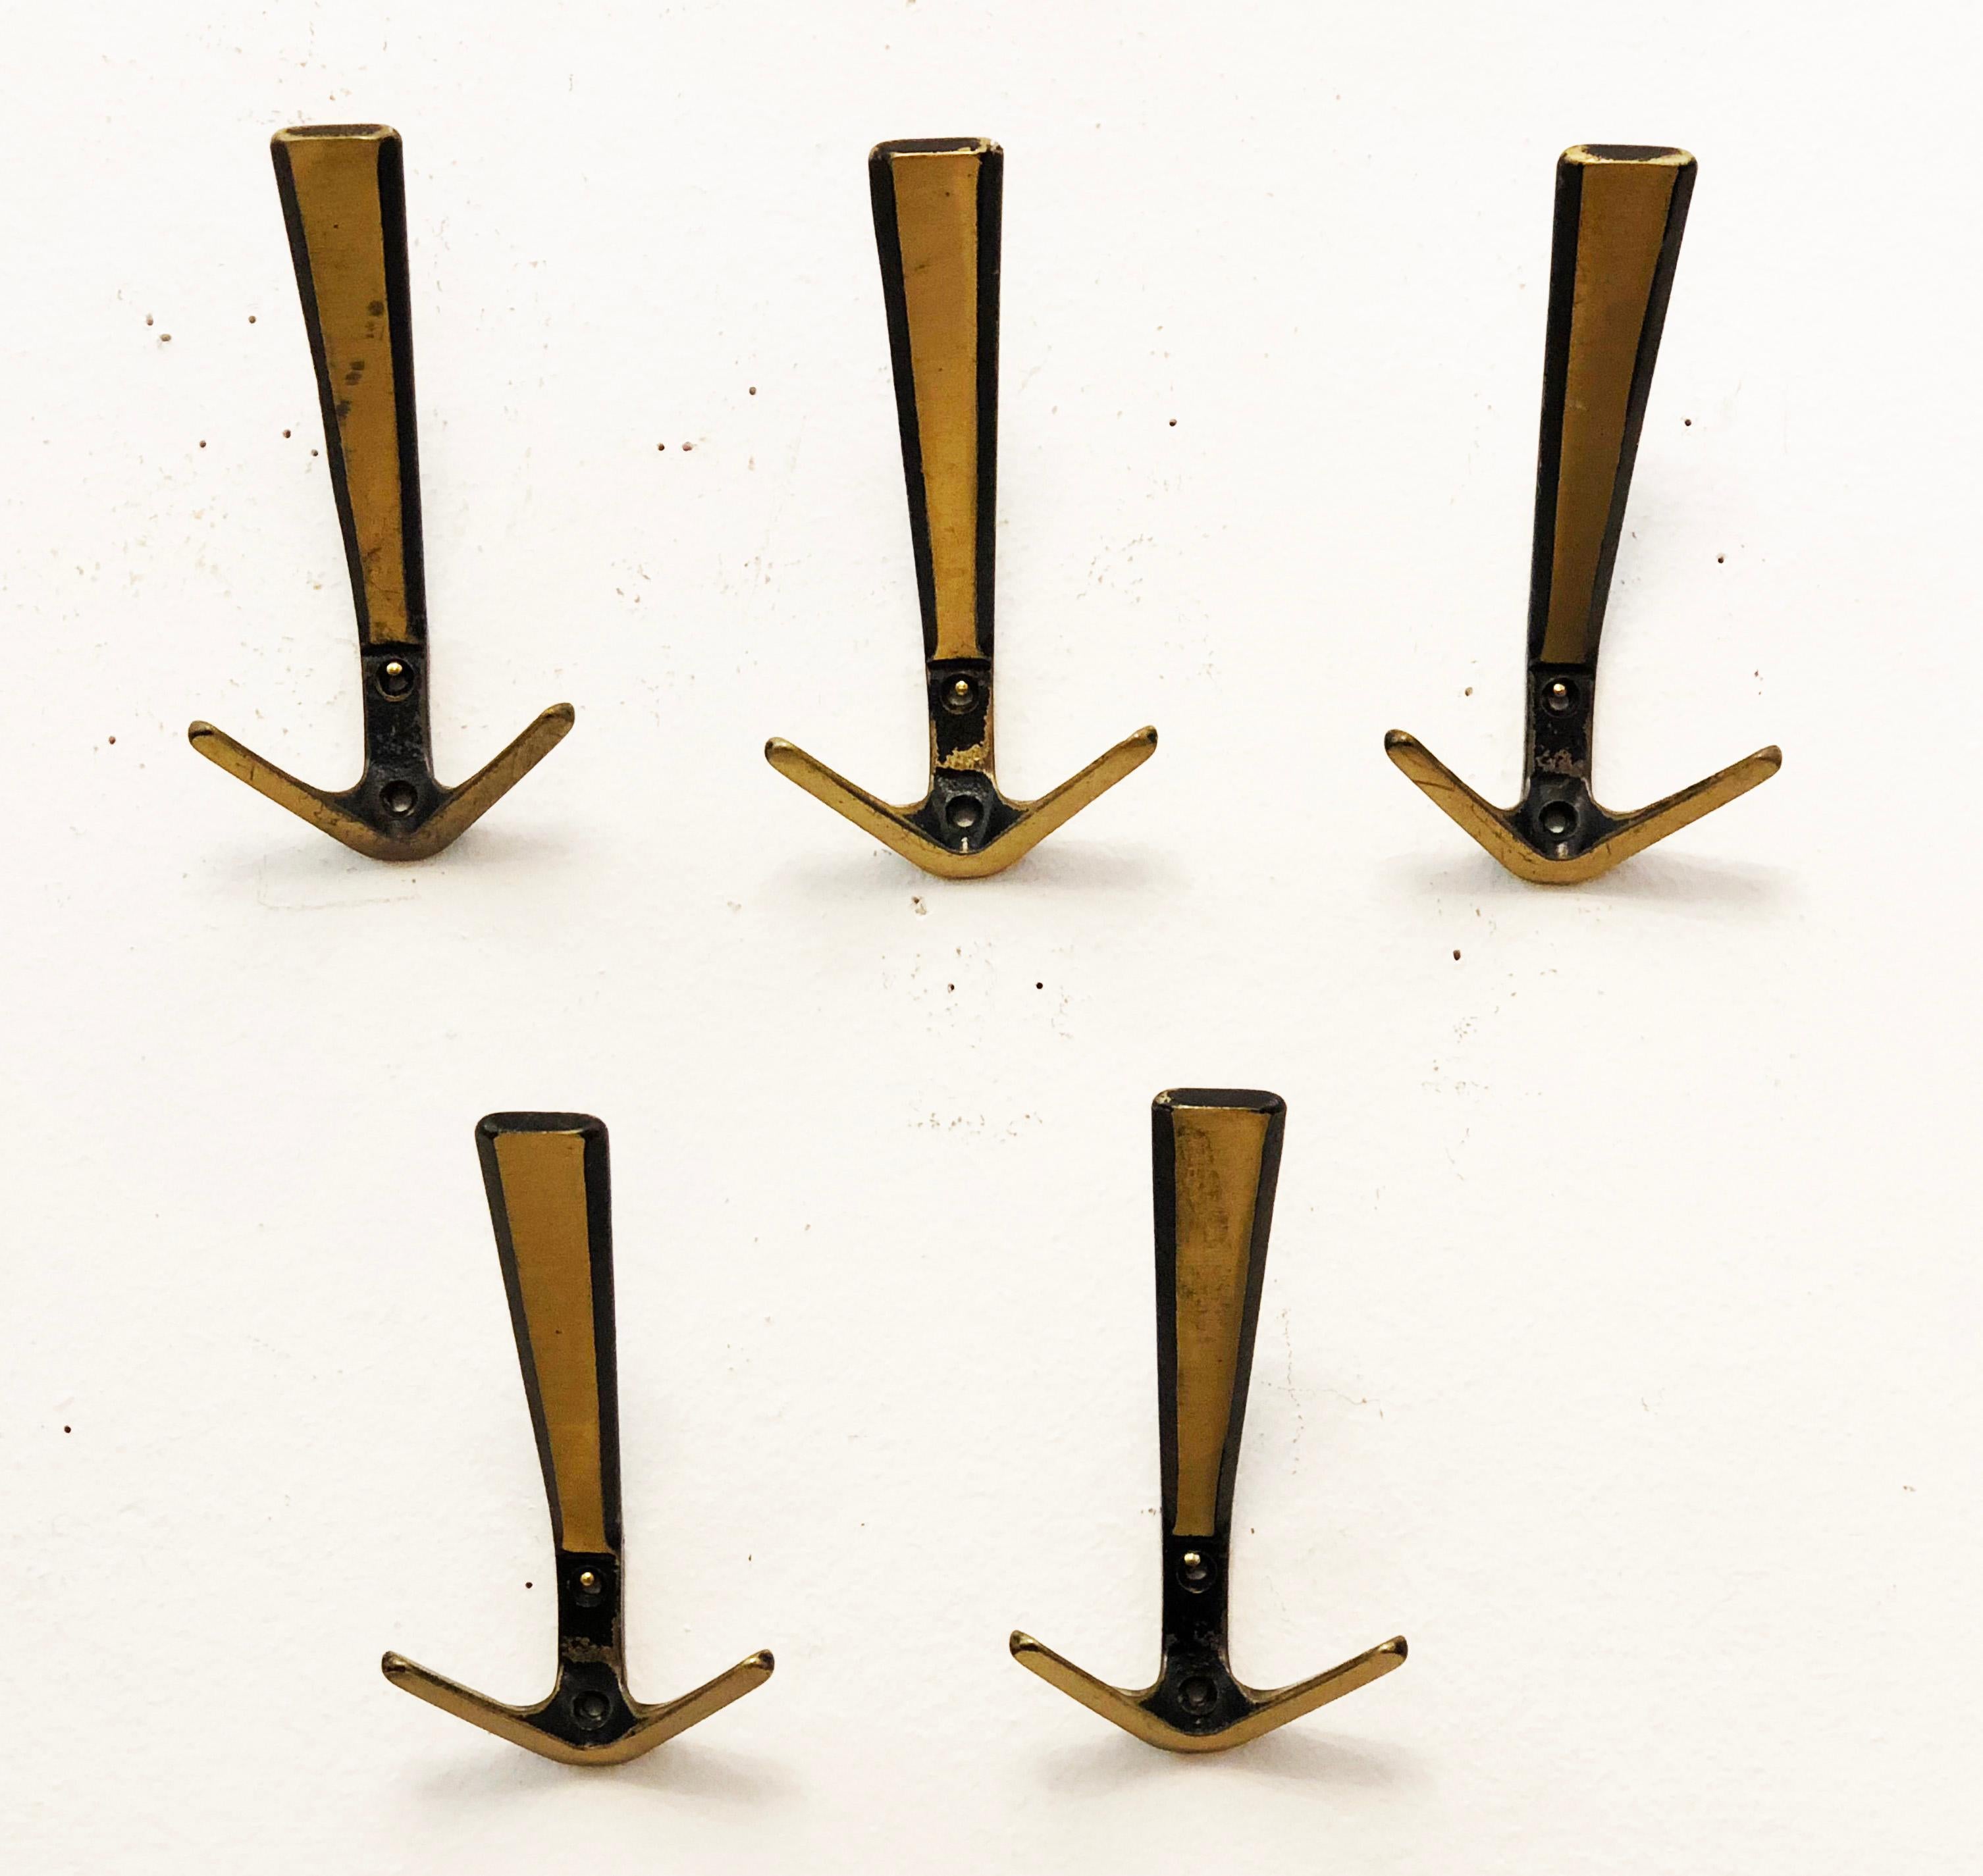 Brass hooks manufactured by Hertha Baller in Austria in the 1950s.
Up to 12 available.